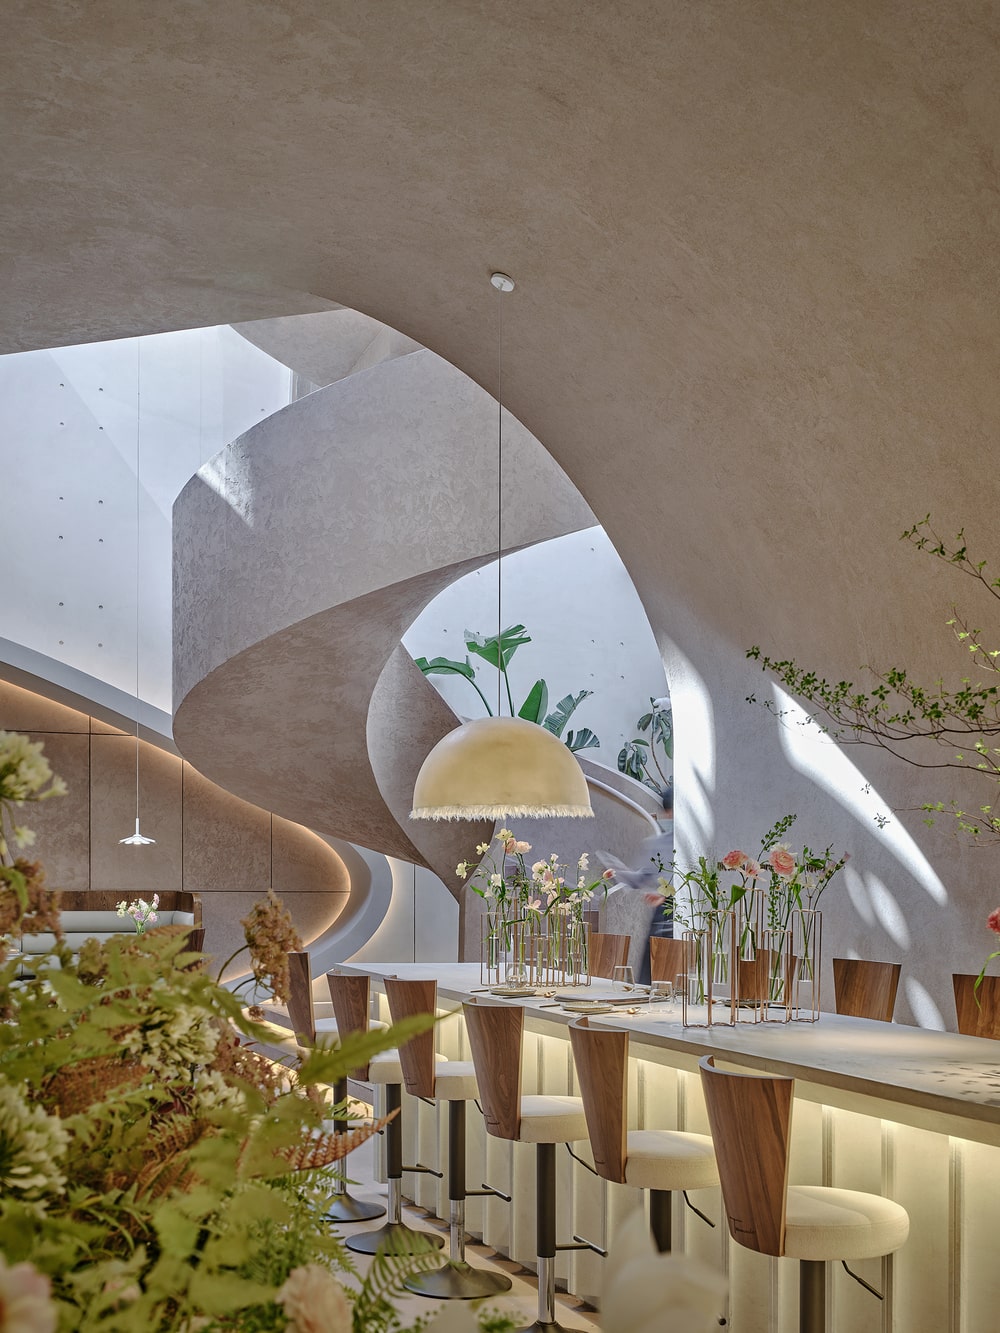 Tomacado Restaurant by Liang Architecture Studio